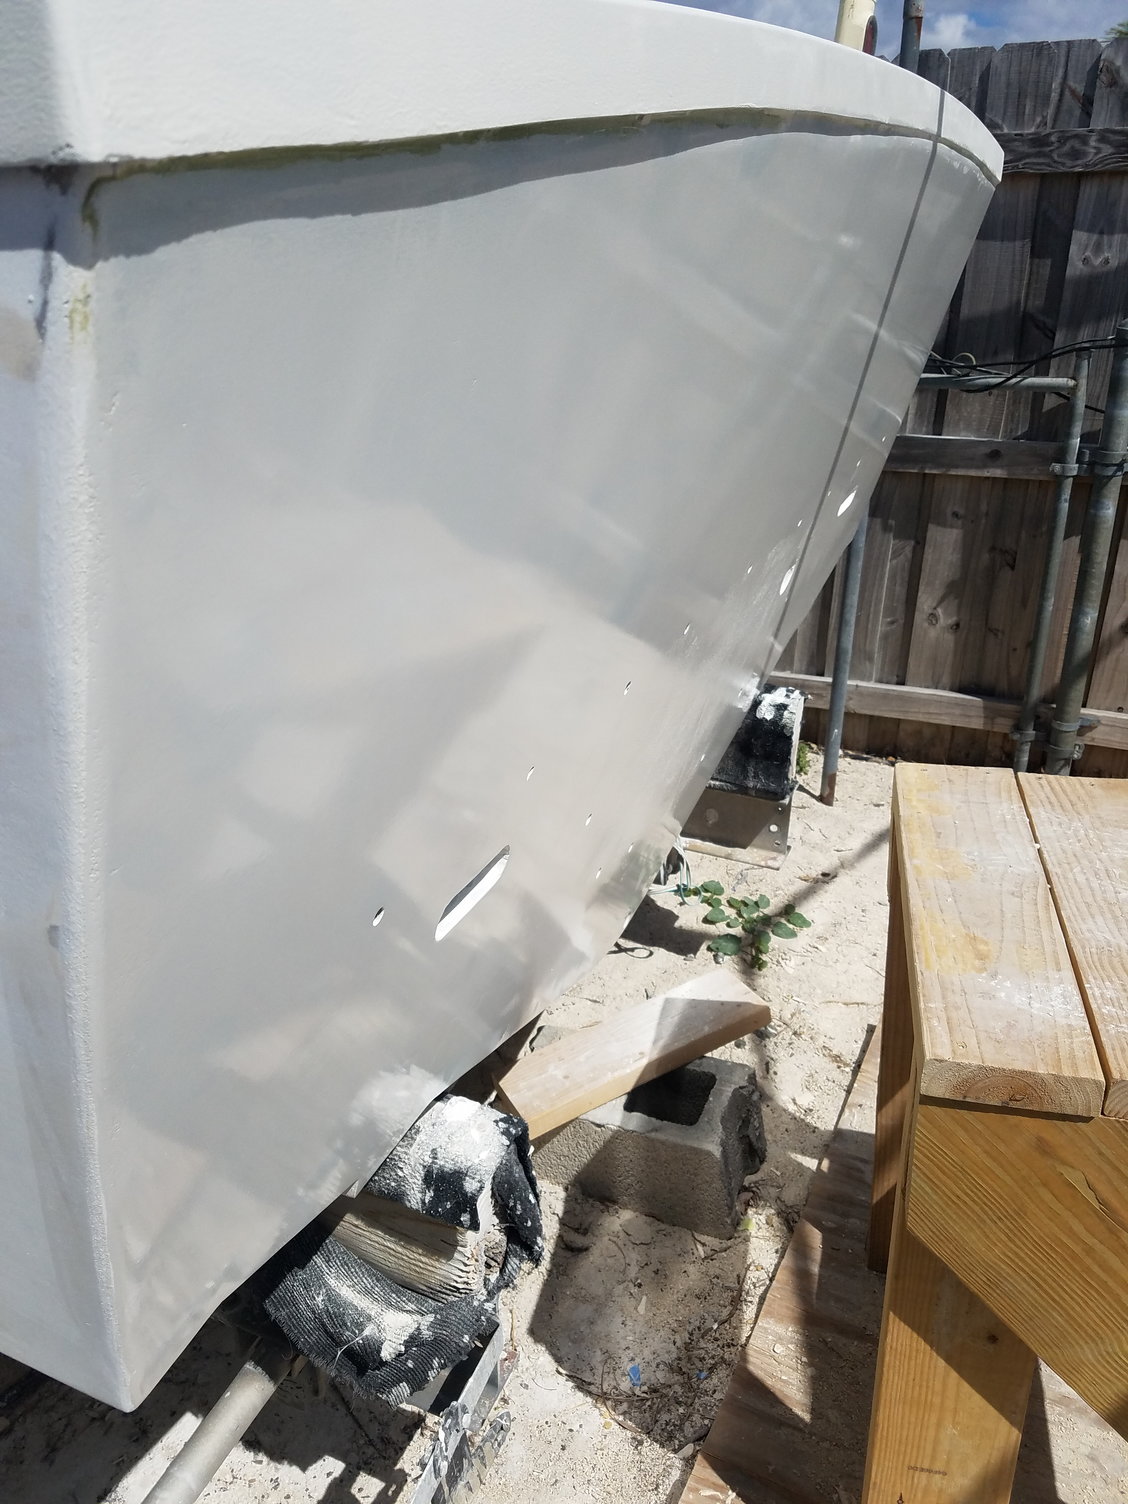 Building a transom fish box - The Hull Truth - Boating and Fishing Forum